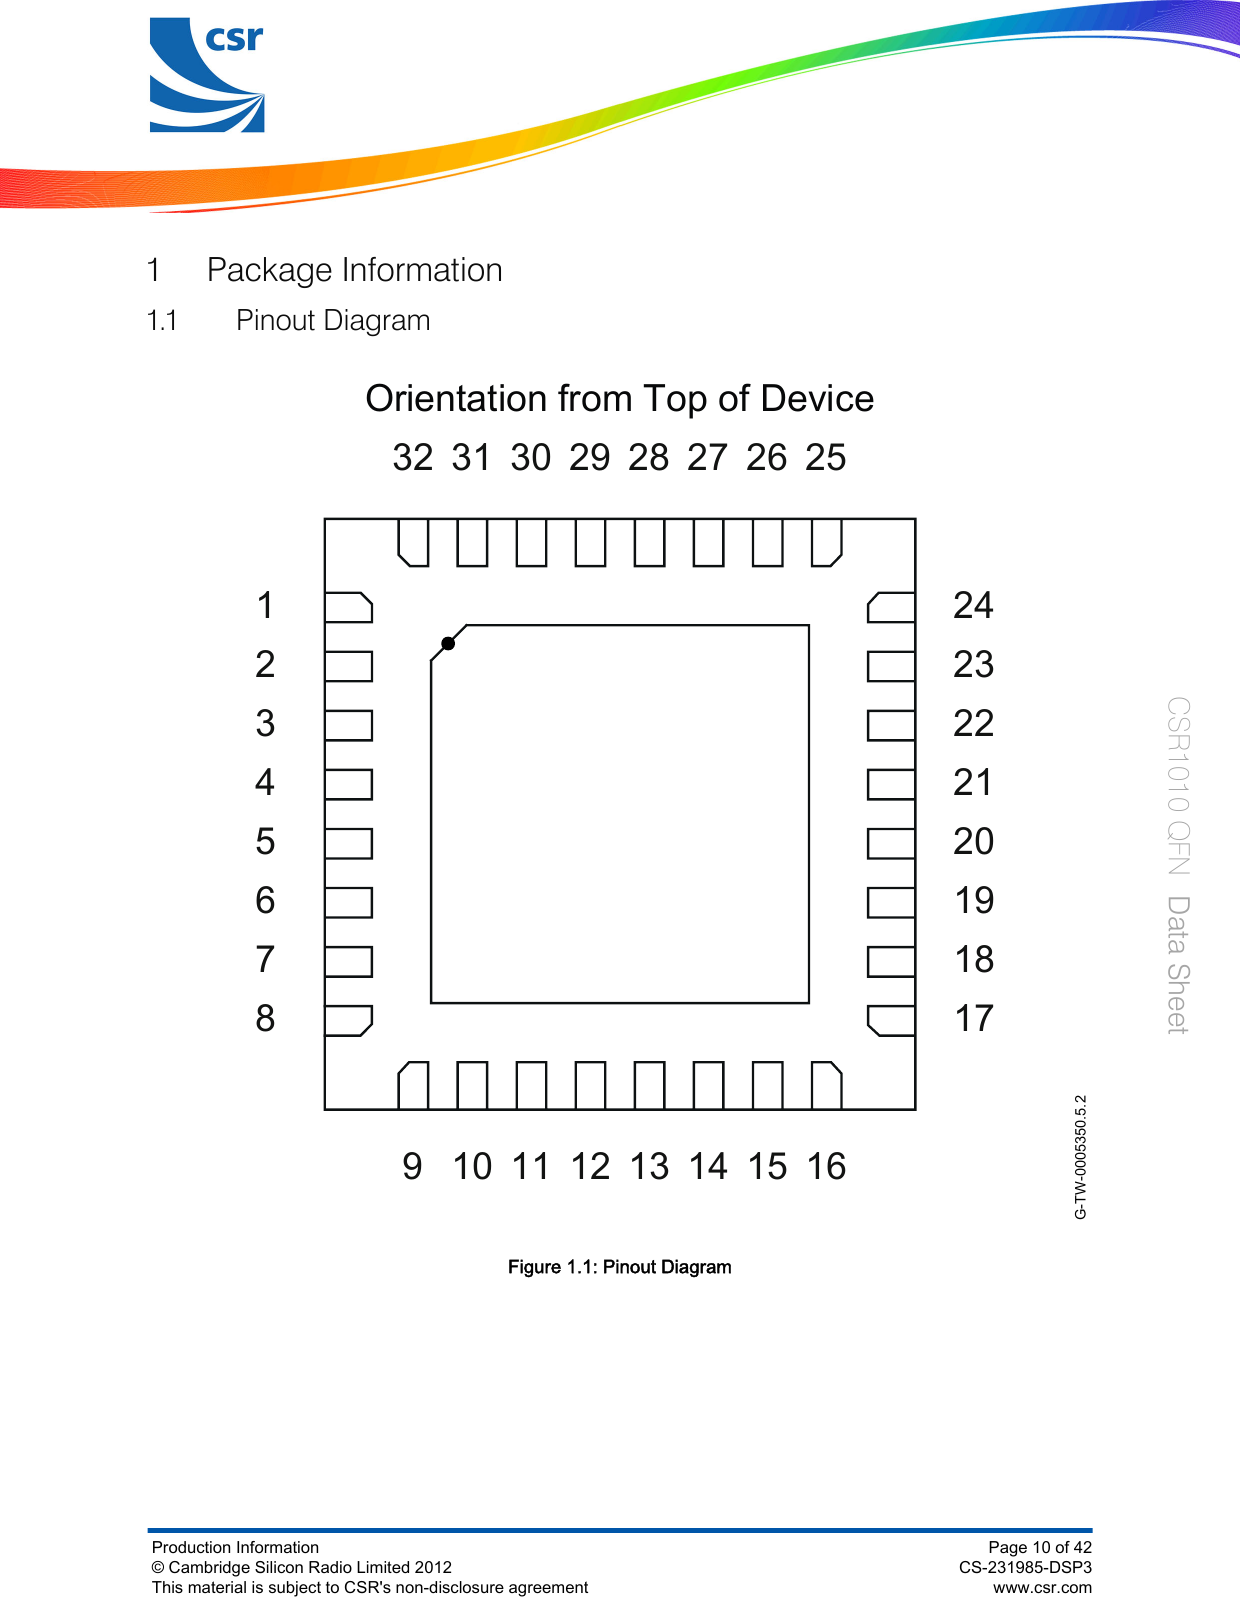 1 Package Information1.1 Pinout DiagramG-TW-0005350.5.2Orientation from Top of Device13123456789 101112 14151617181920212223242526272829303132Figure 1.1: Pinout DiagramProduction Information© Cambridge Silicon Radio Limited 2012This material is subject to CSR&apos;s non-disclosure agreementPage 10 of 42CS-231985-DSP3www.csr.comCSR1010 QFN  Data Sheet